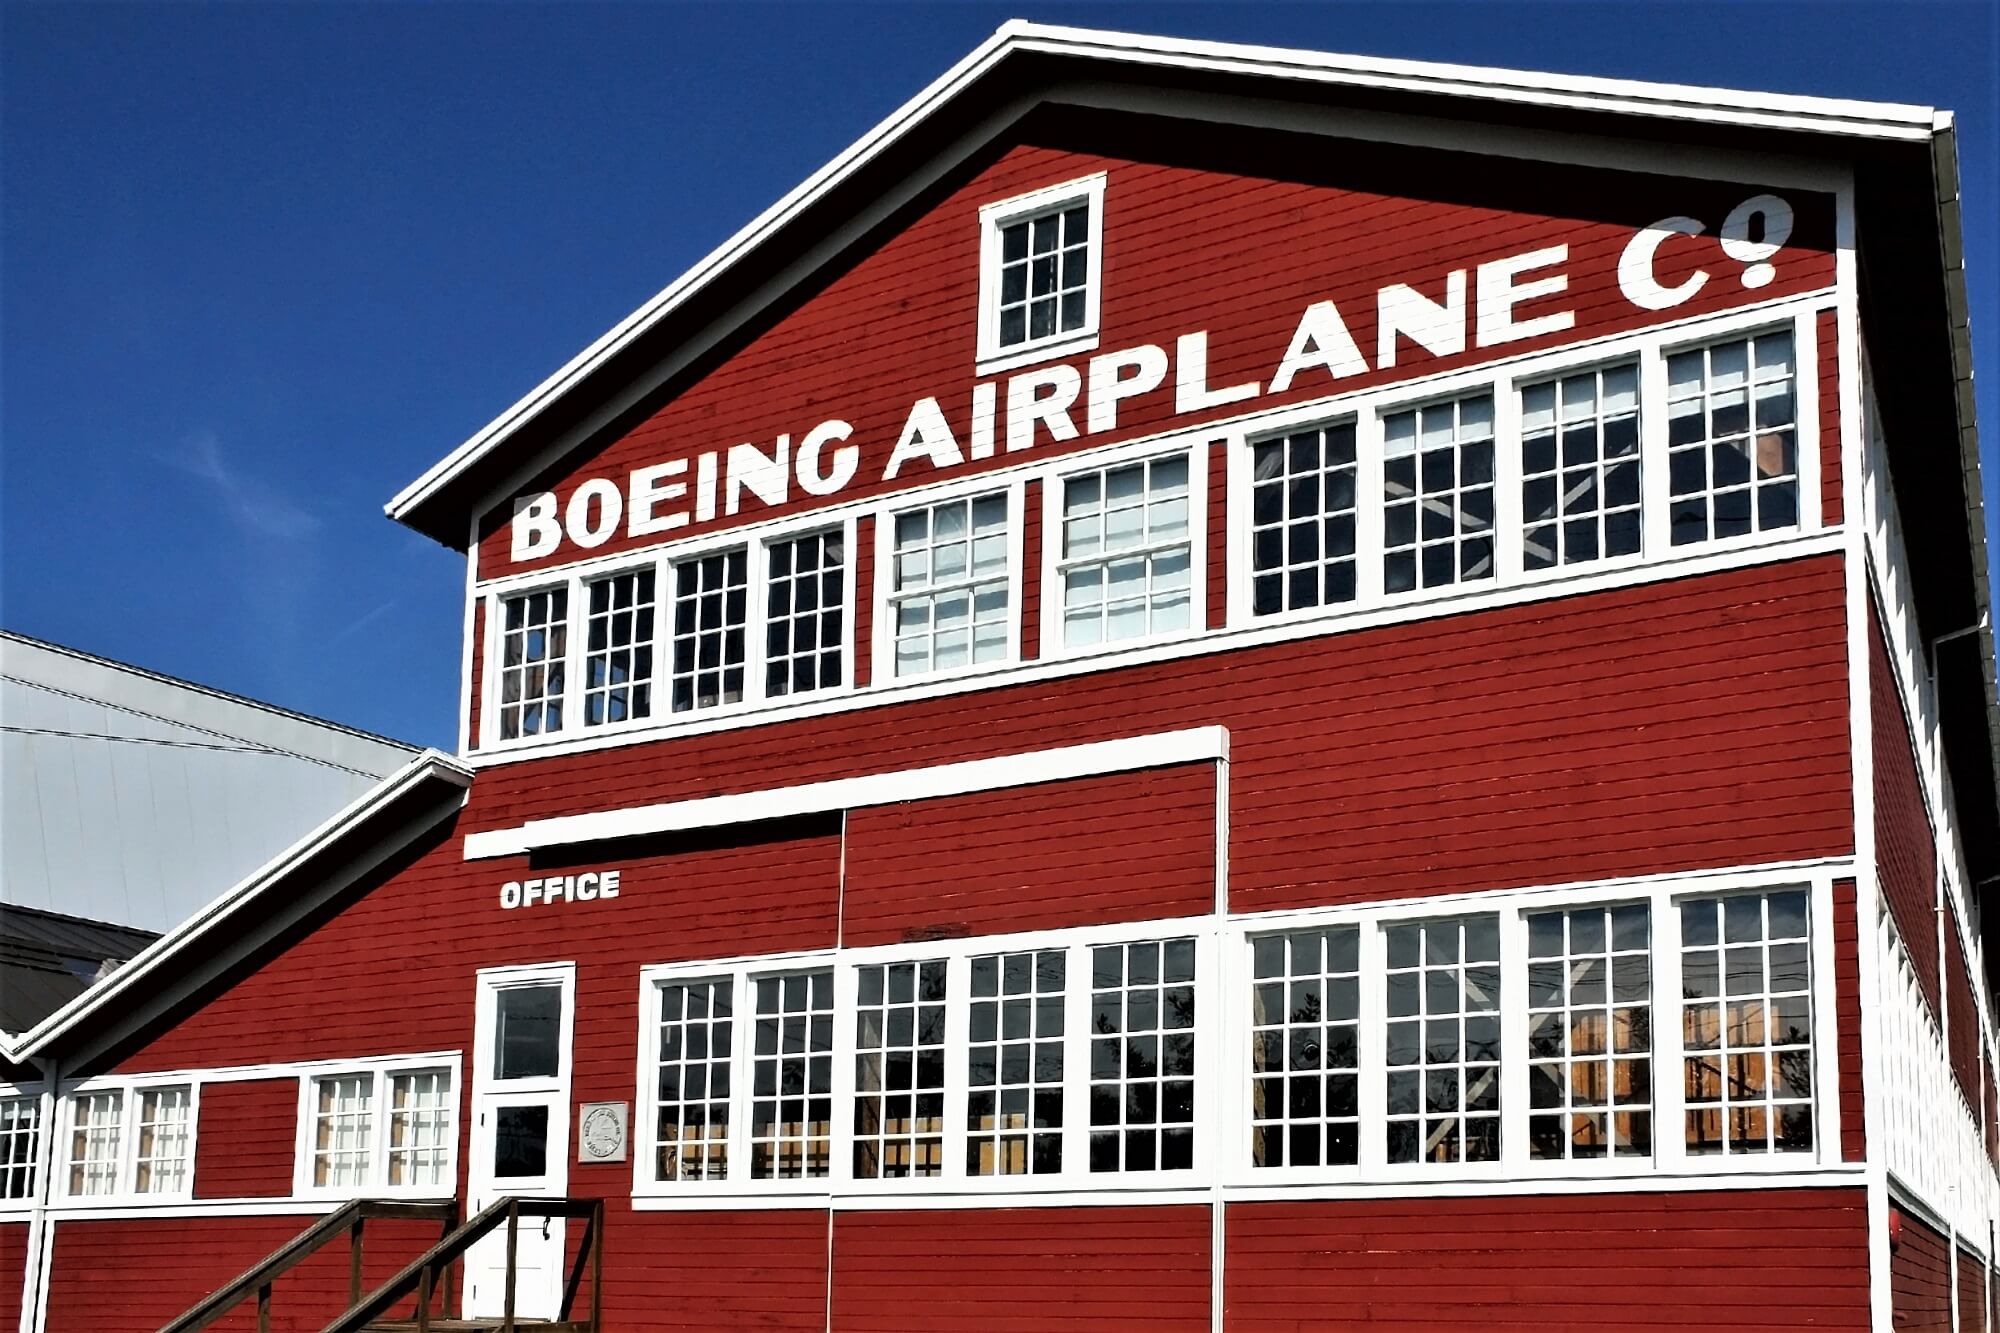 The original manufacturing plant of Boeing